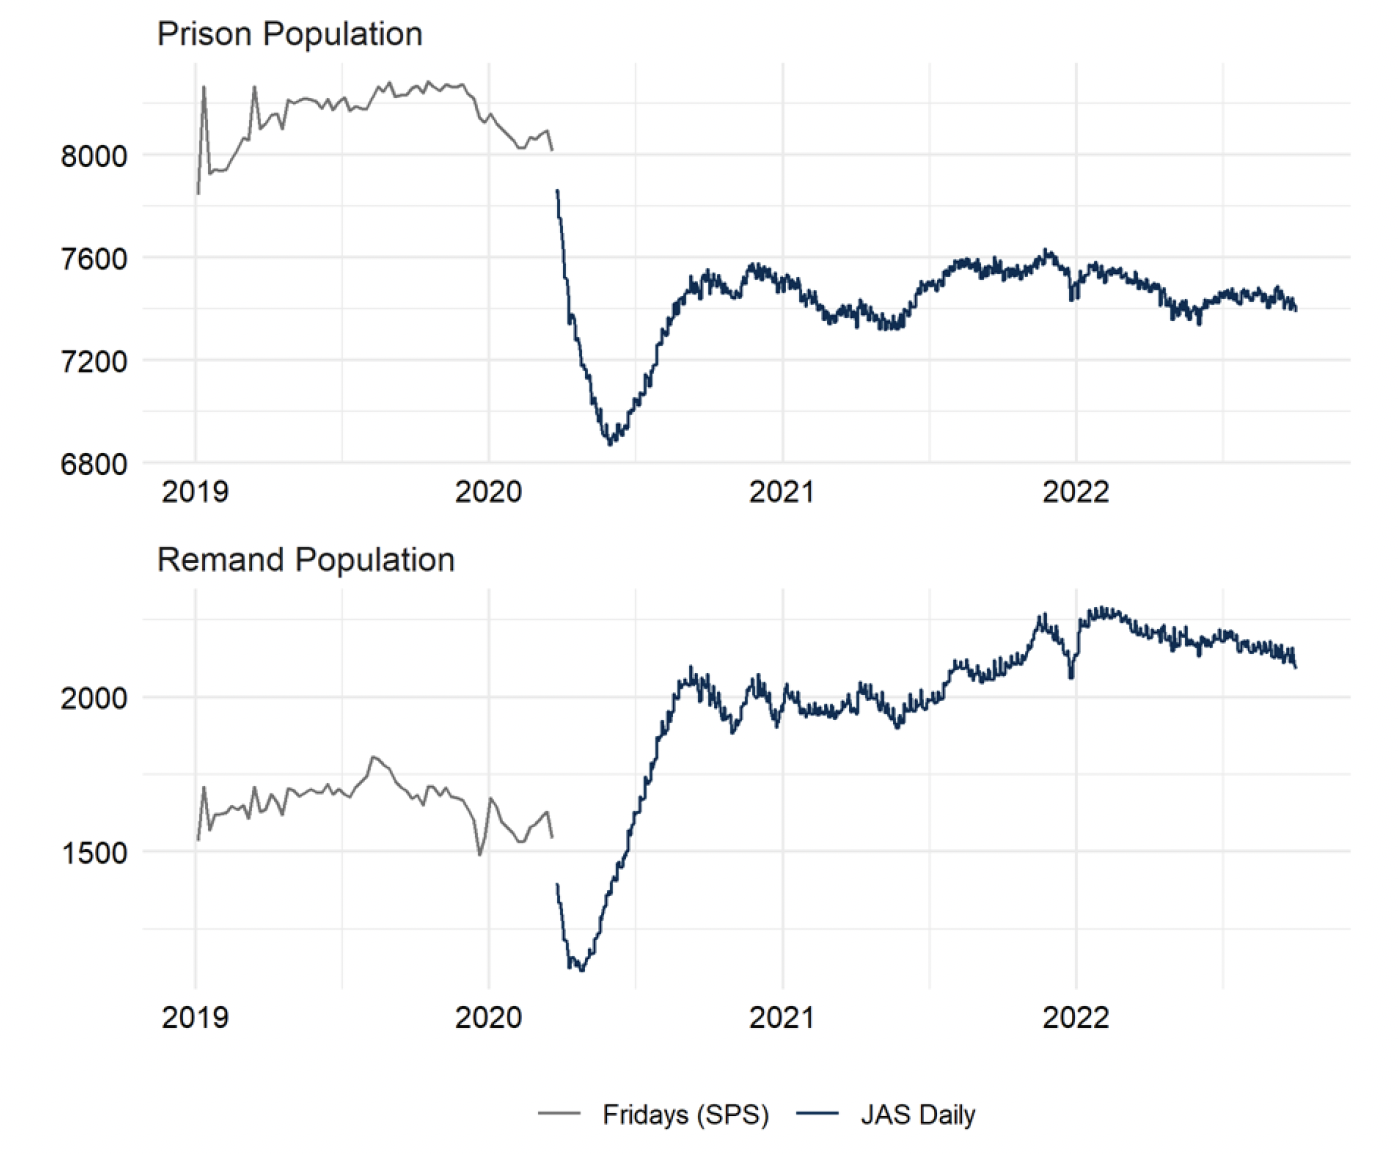 The Friday prison population overall and the remand population up to April 2020. Thereafter, daily population figures are provided. The trends are described in the body text. Last updated October 2022. Next update due November 2022.